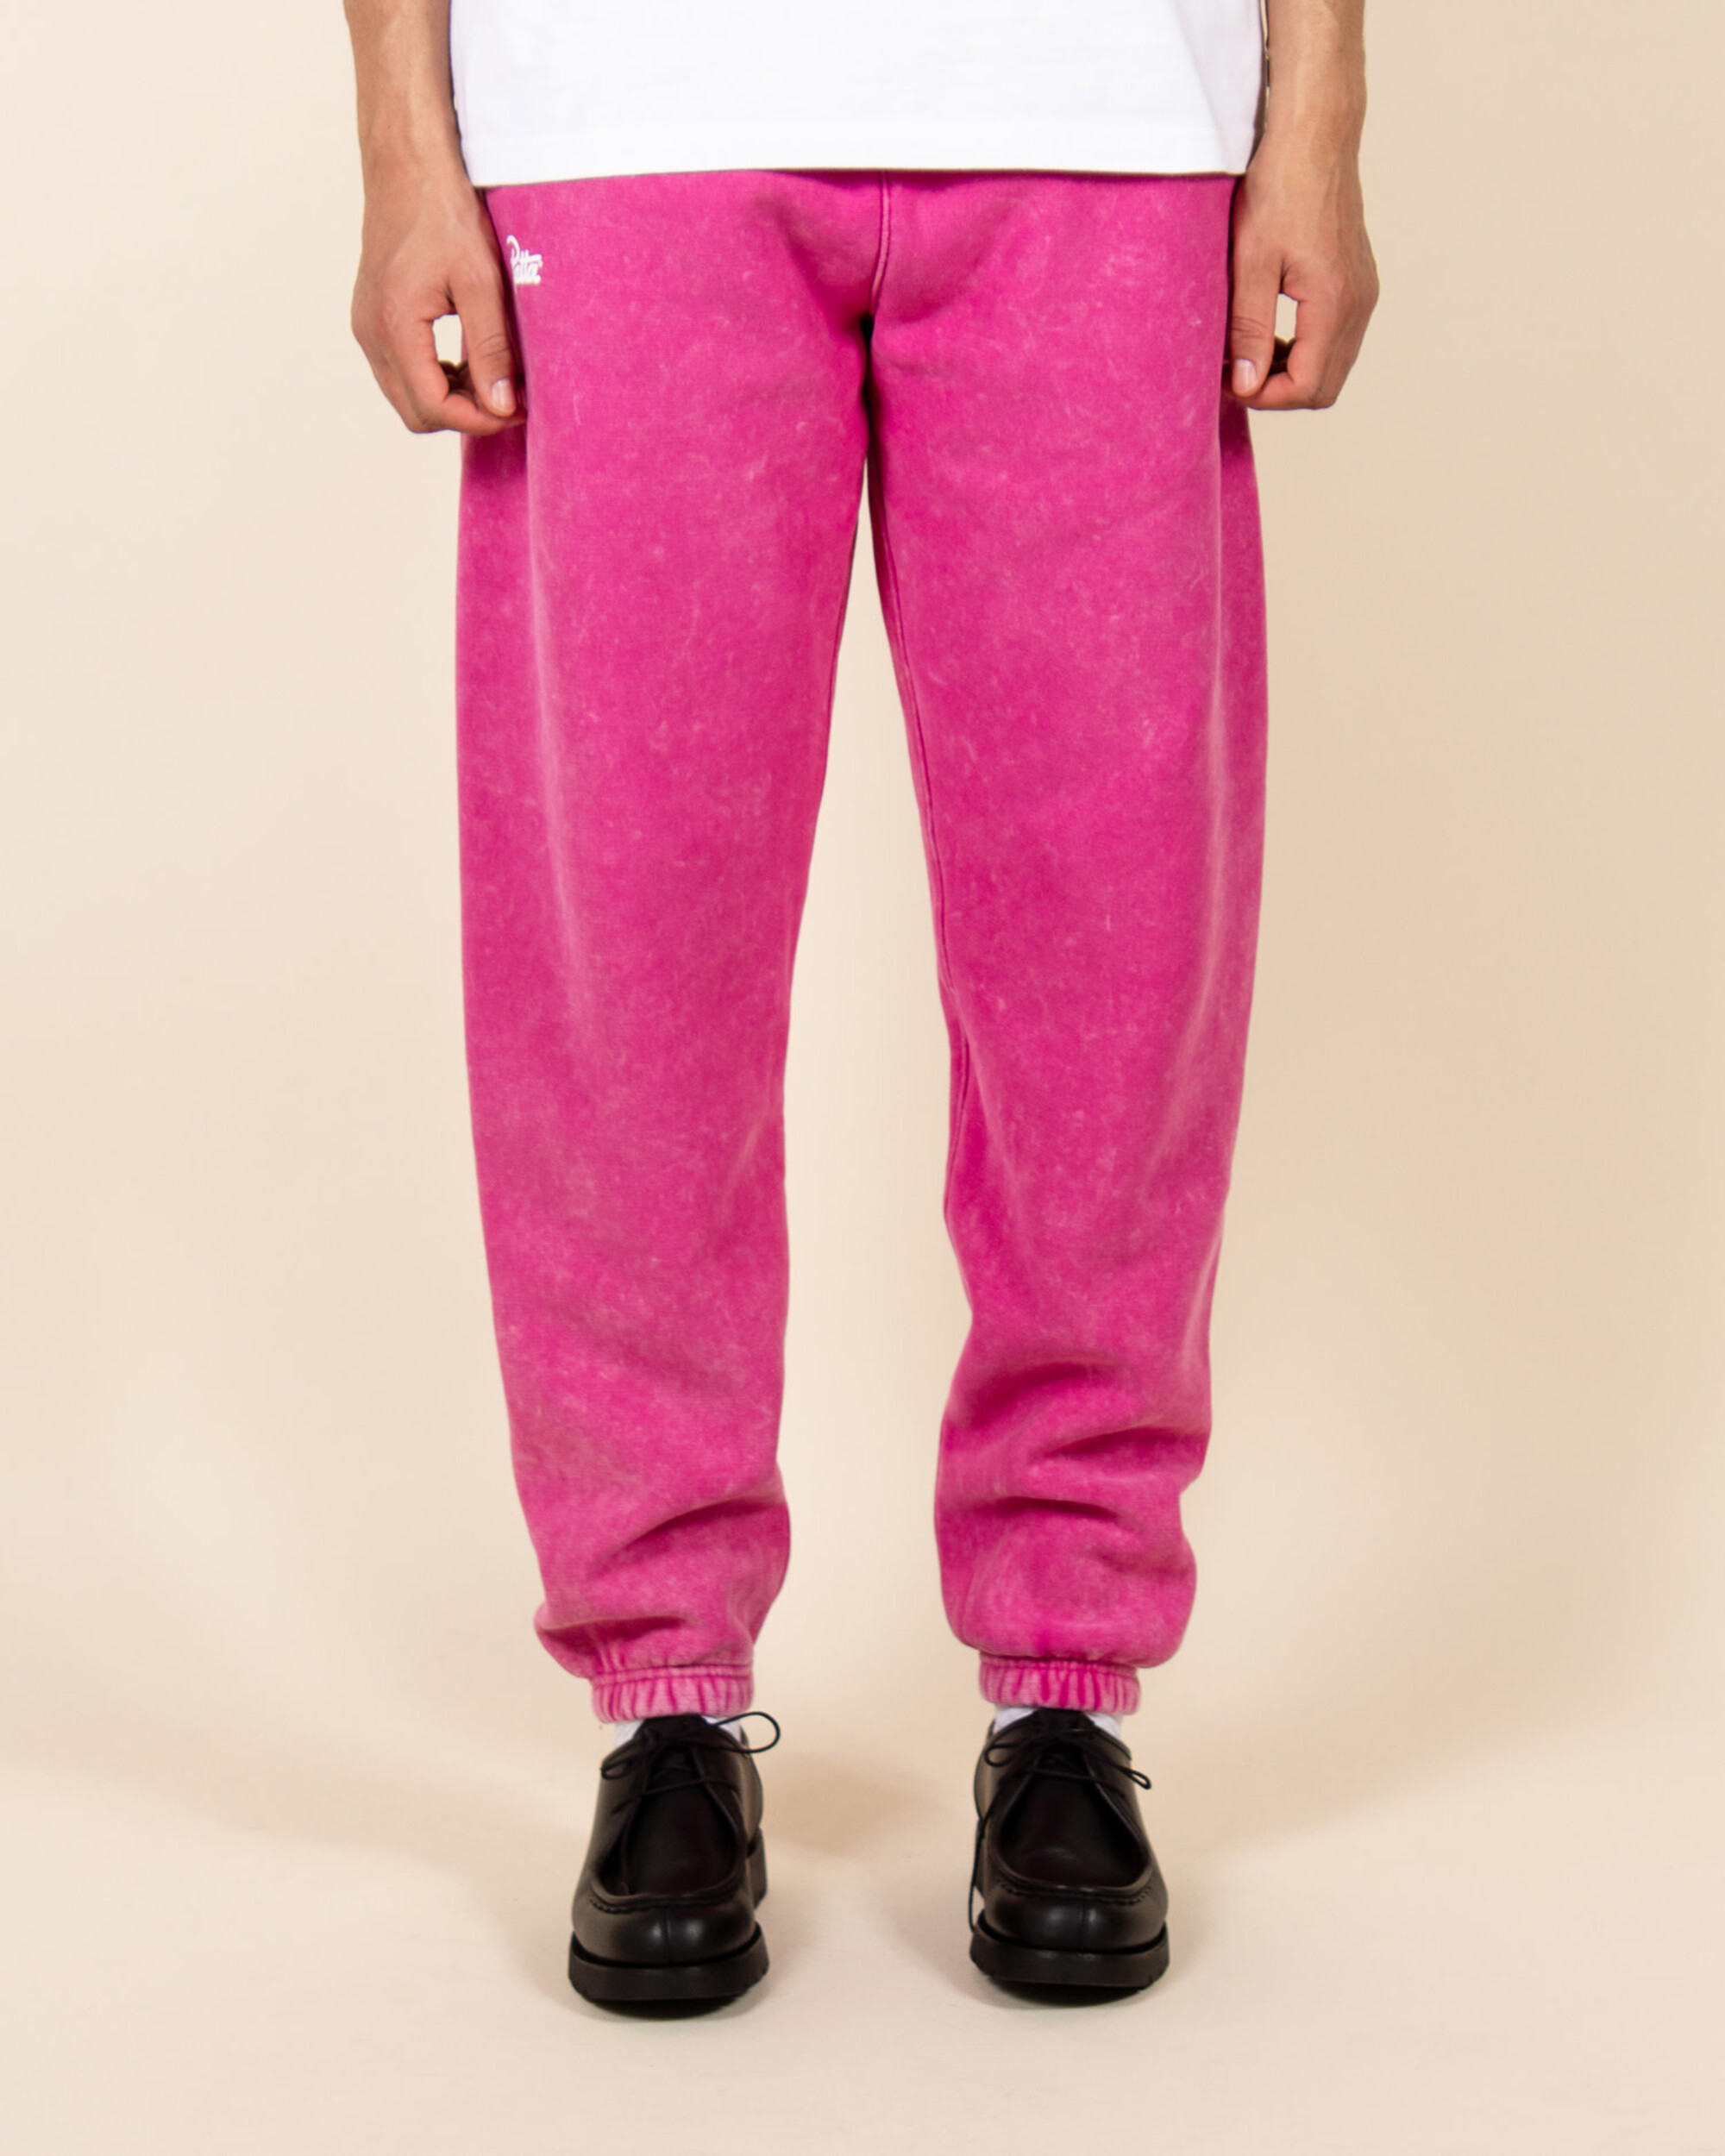 Patta Classic Washed Jogging Pants - Fuchsia Red